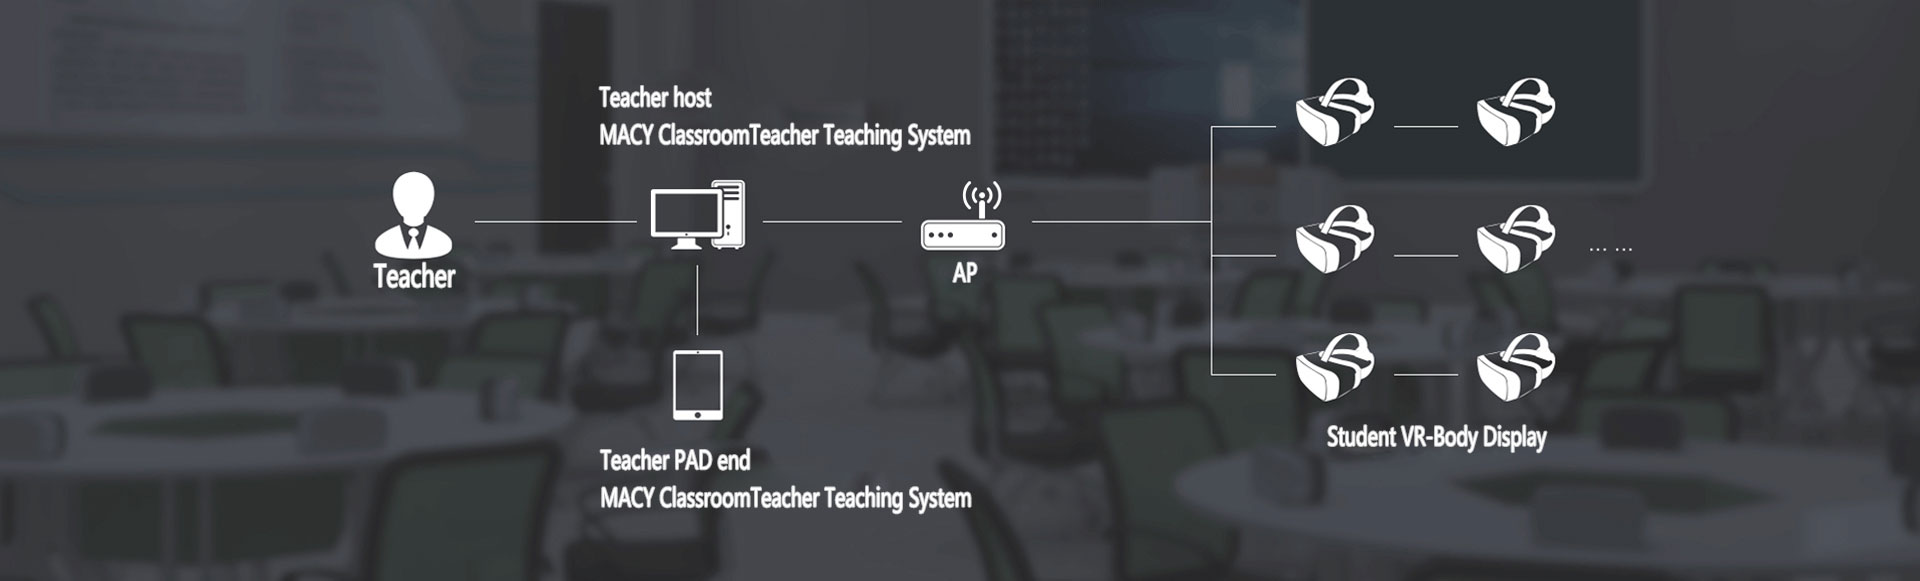 MACY-Classroom Teaching System Architecture